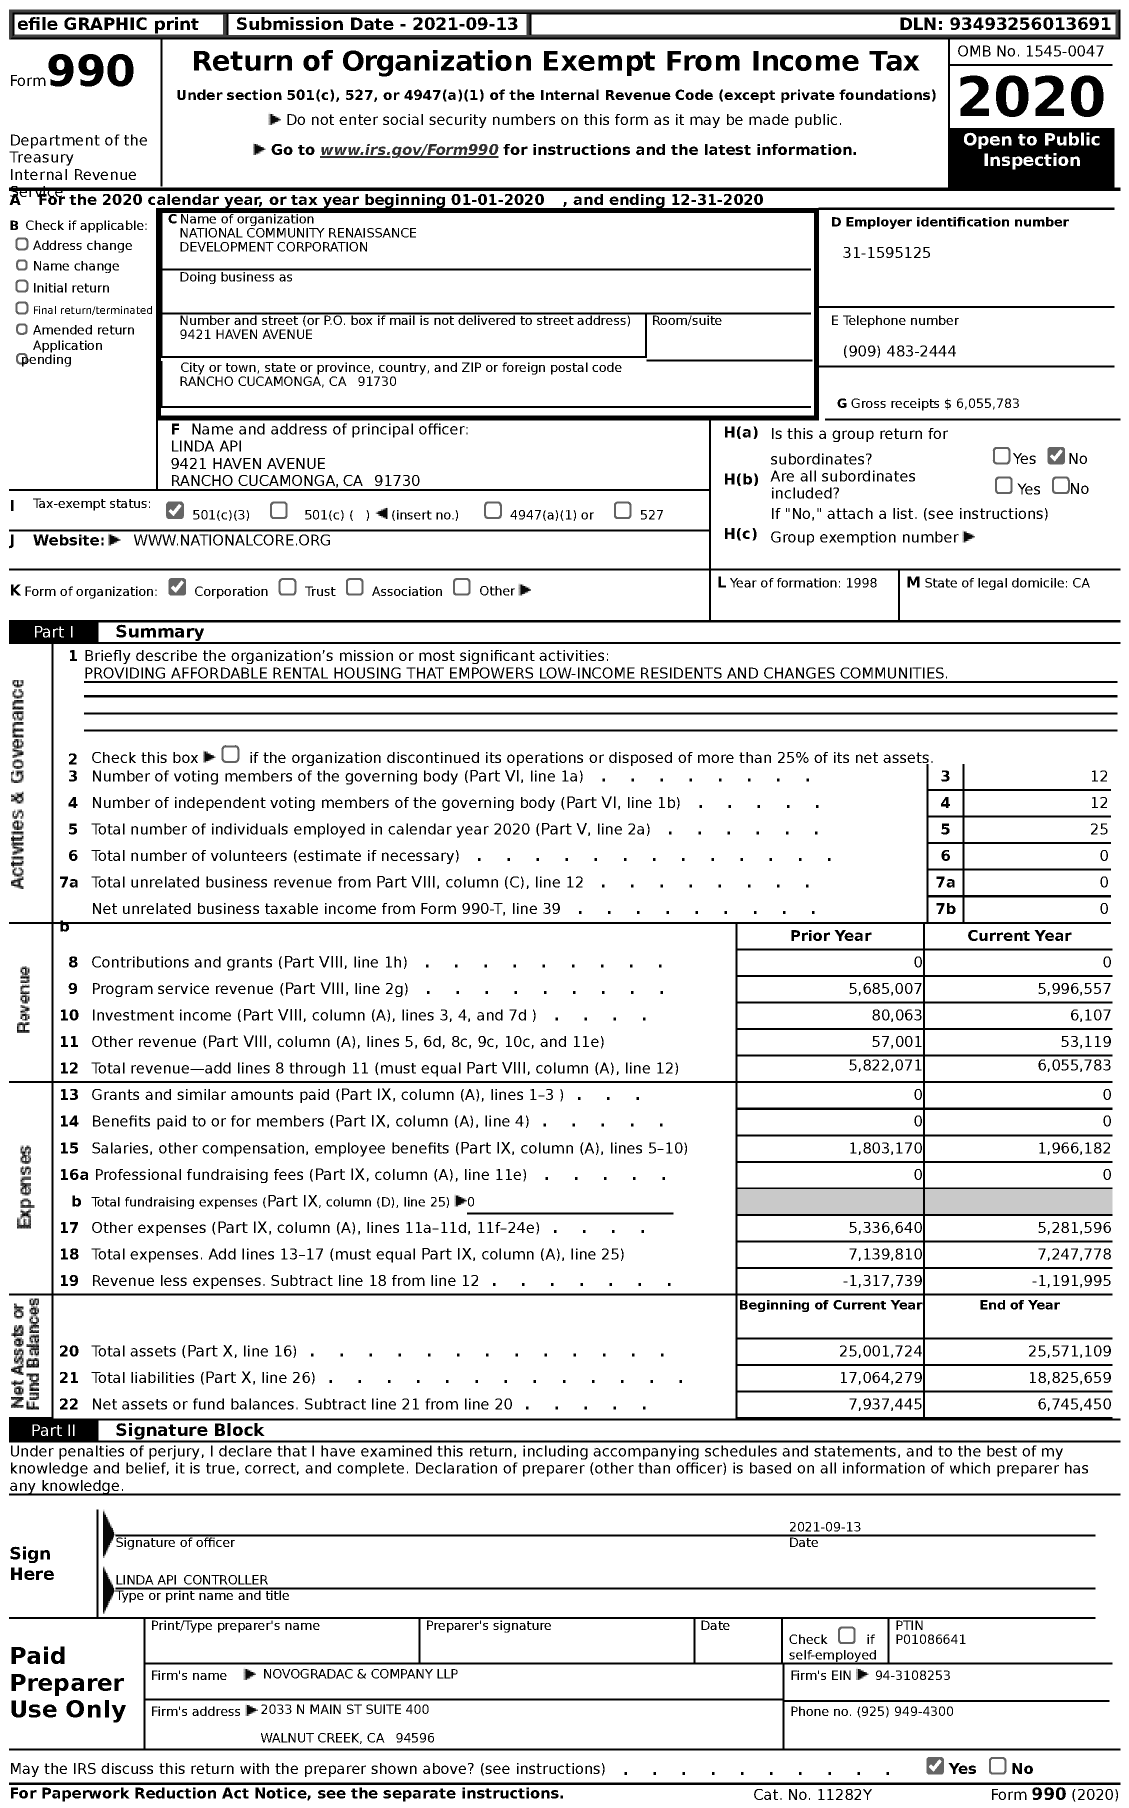 Image of first page of 2020 Form 990 for National Community Renaissance Development Corporation